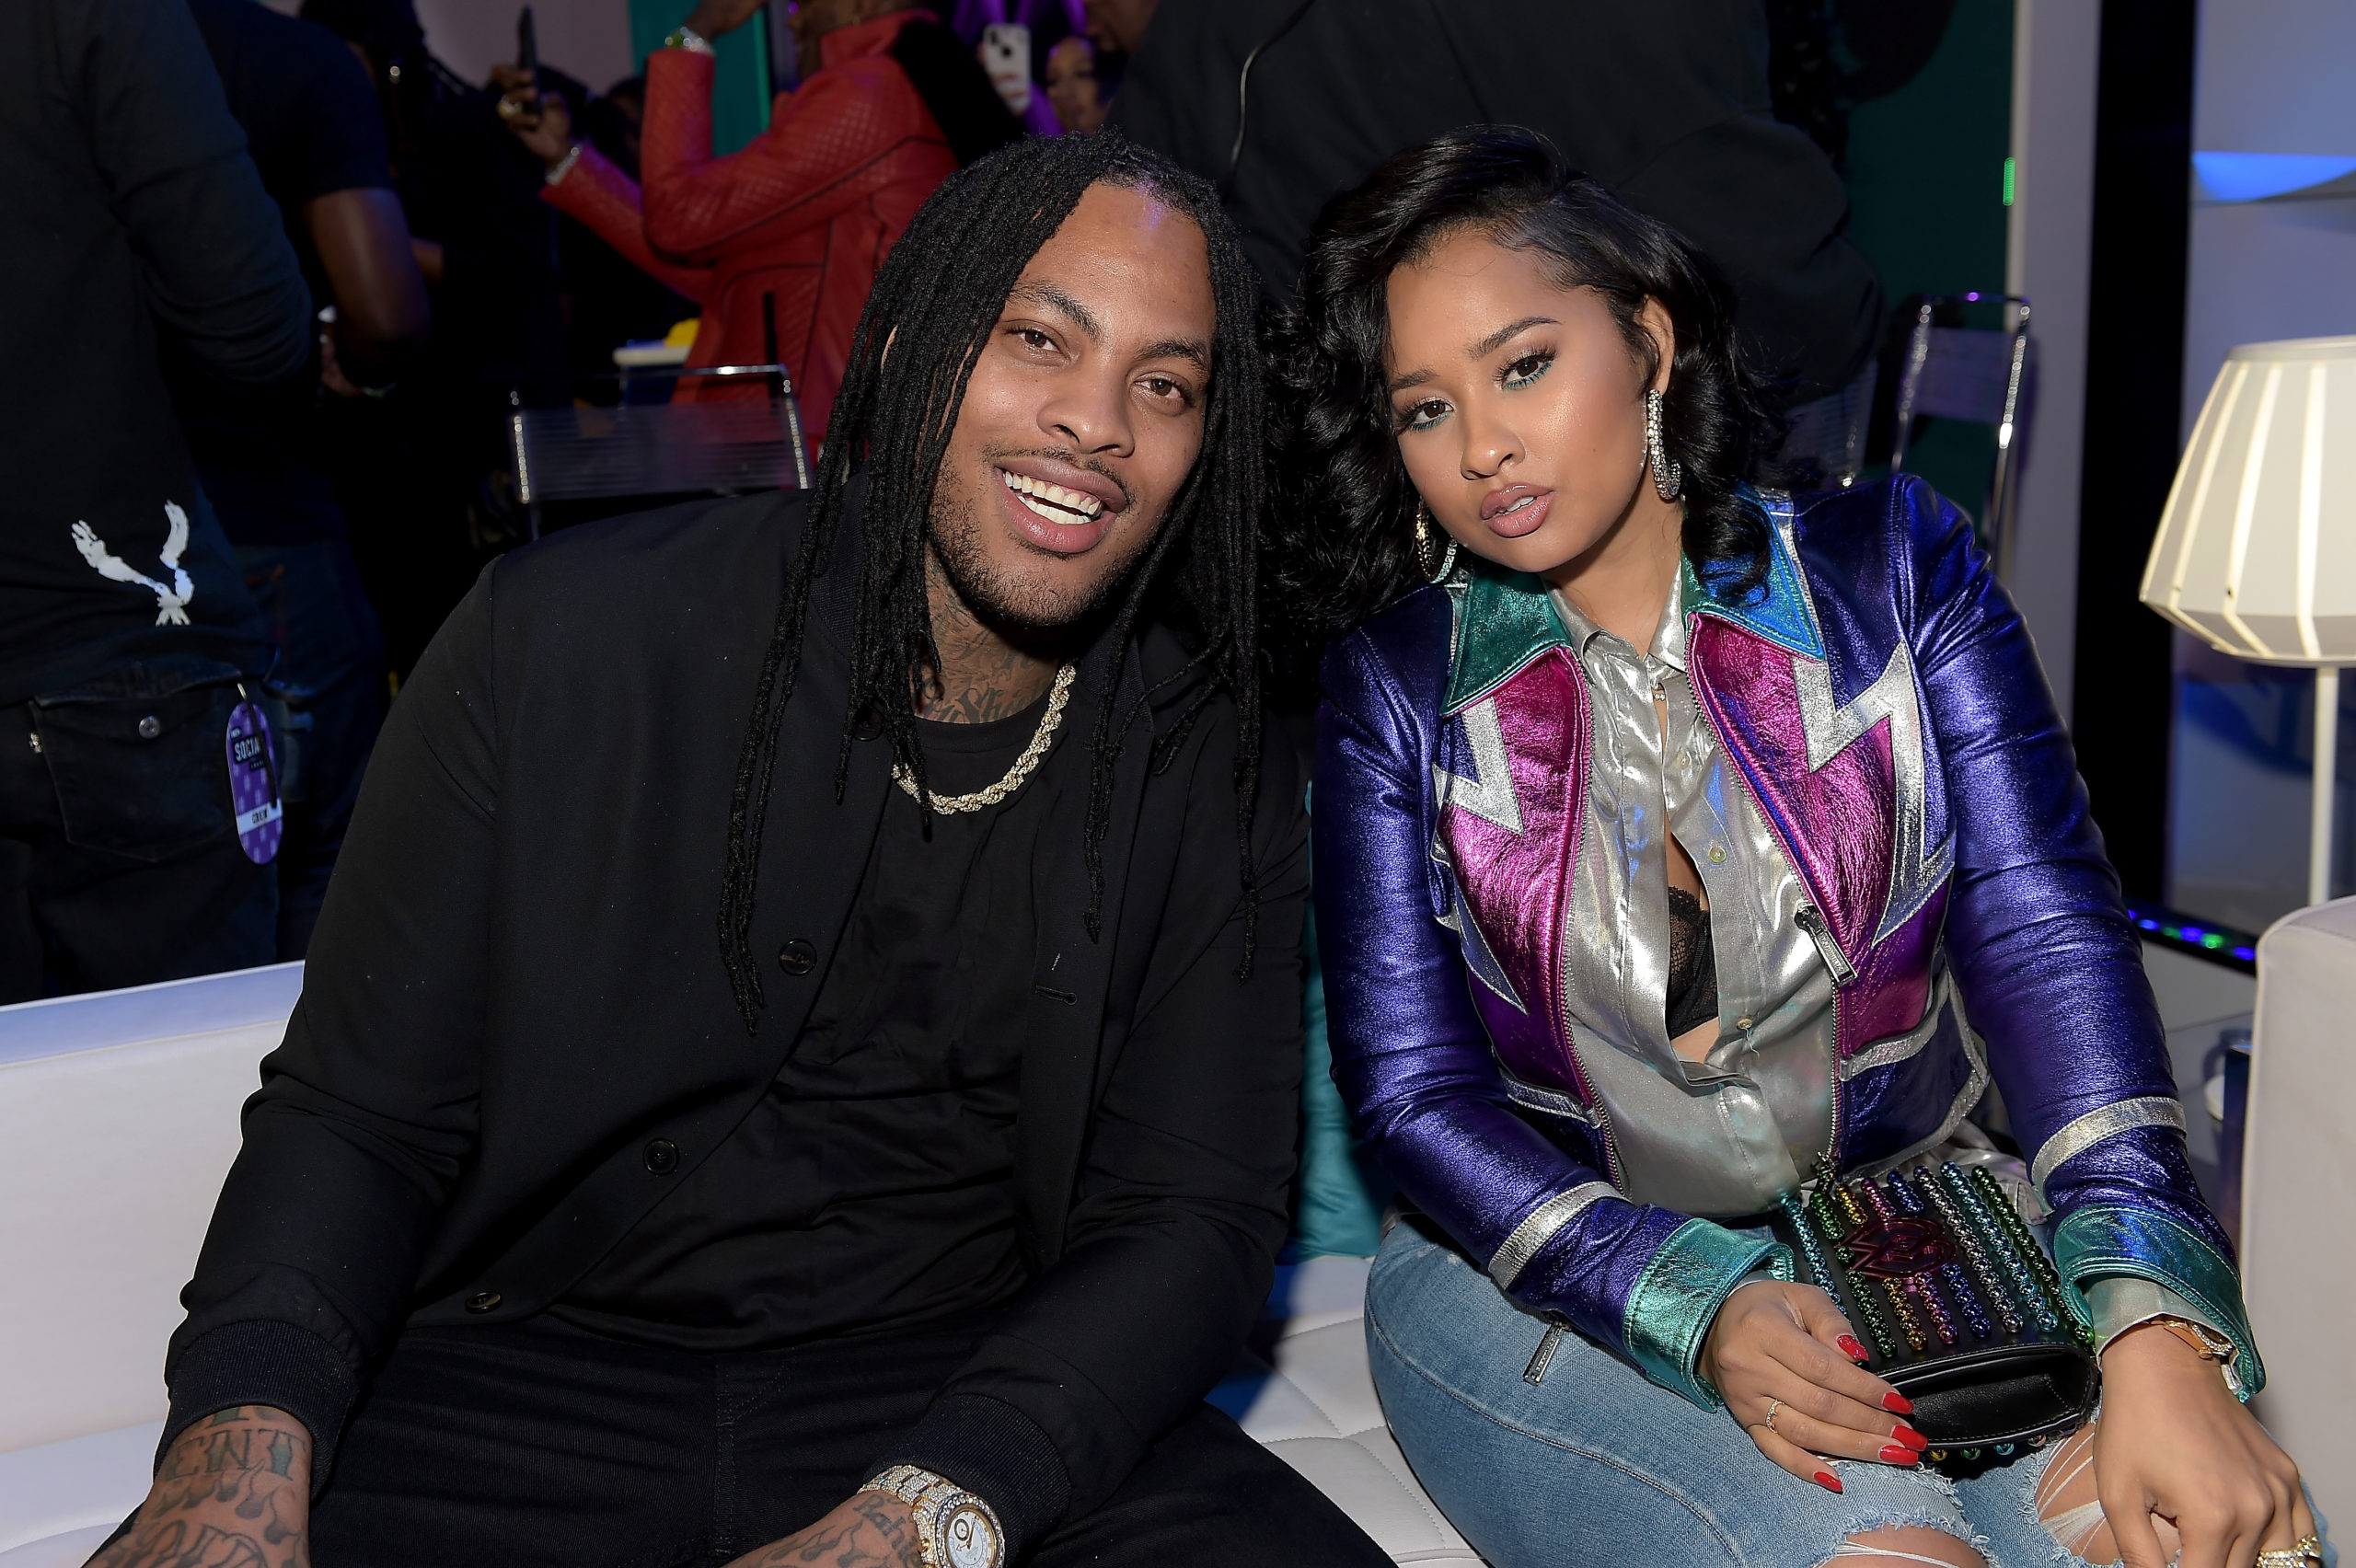 Tammy Would Never': Waka Flocka's Message About 'Power Couple' Backfires as Tammy  Rivera Responds